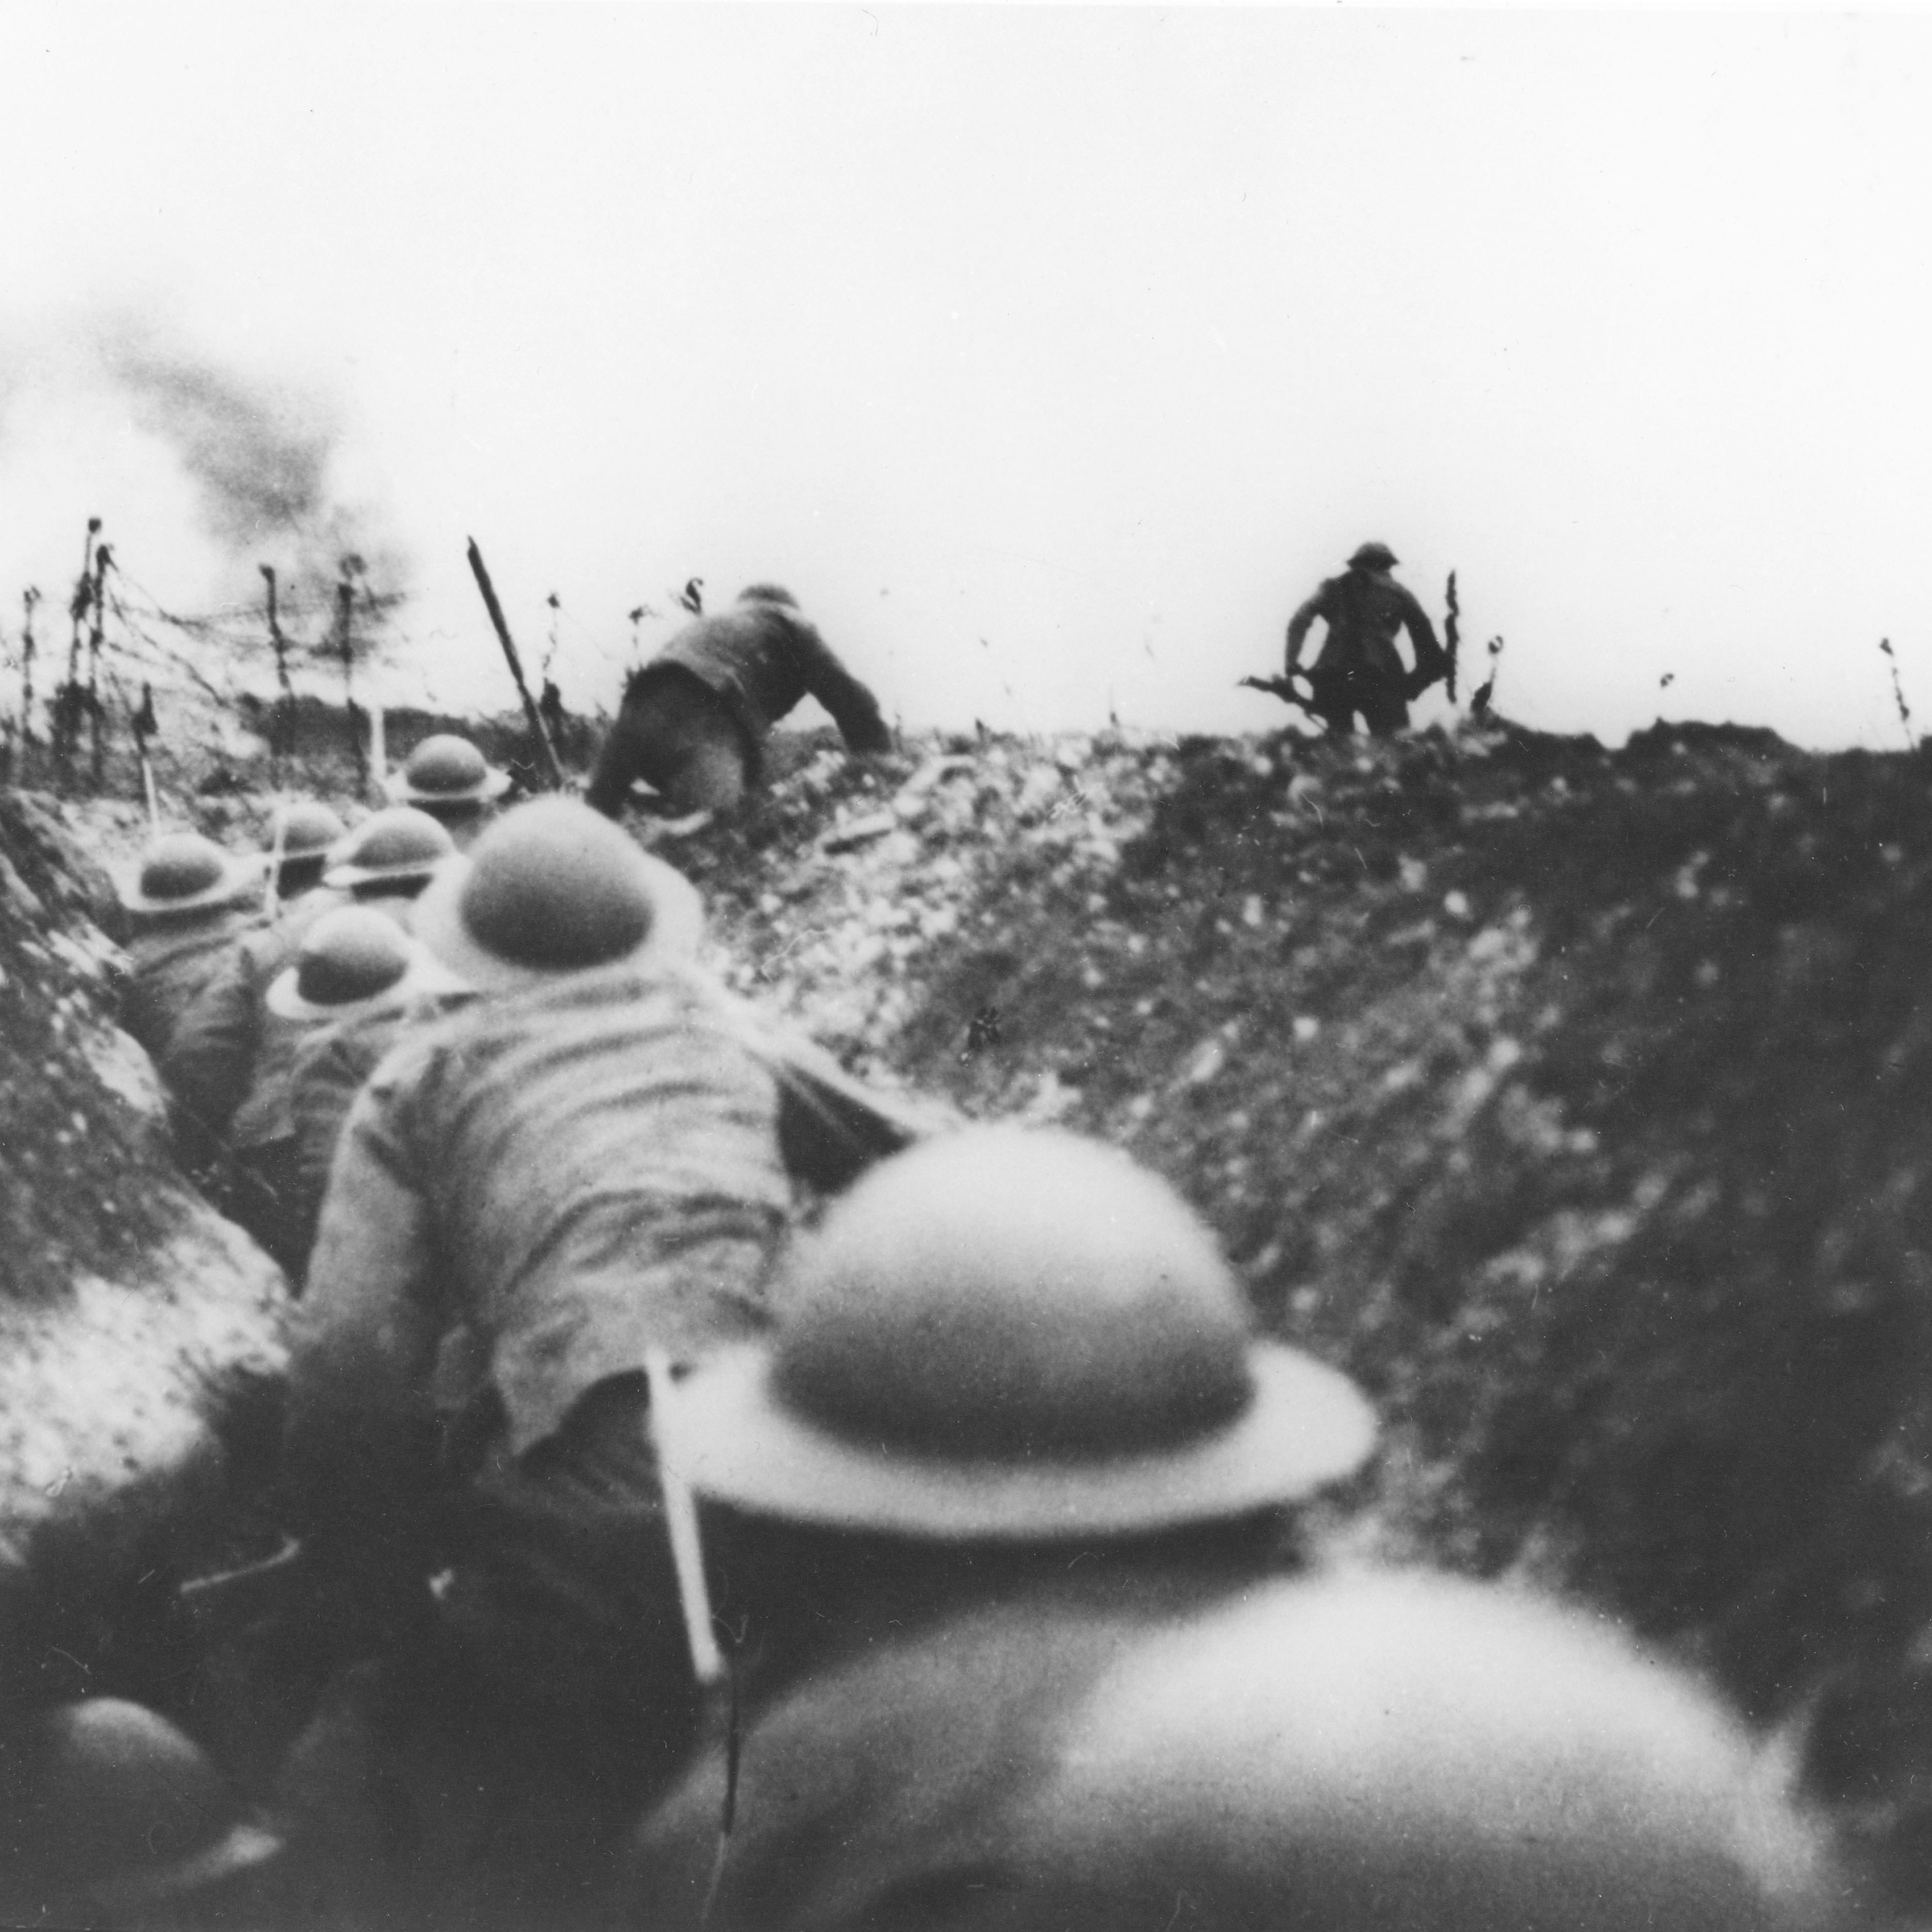 The Weapons and Tactics That Finally Broke the WWI Trench Stalemate